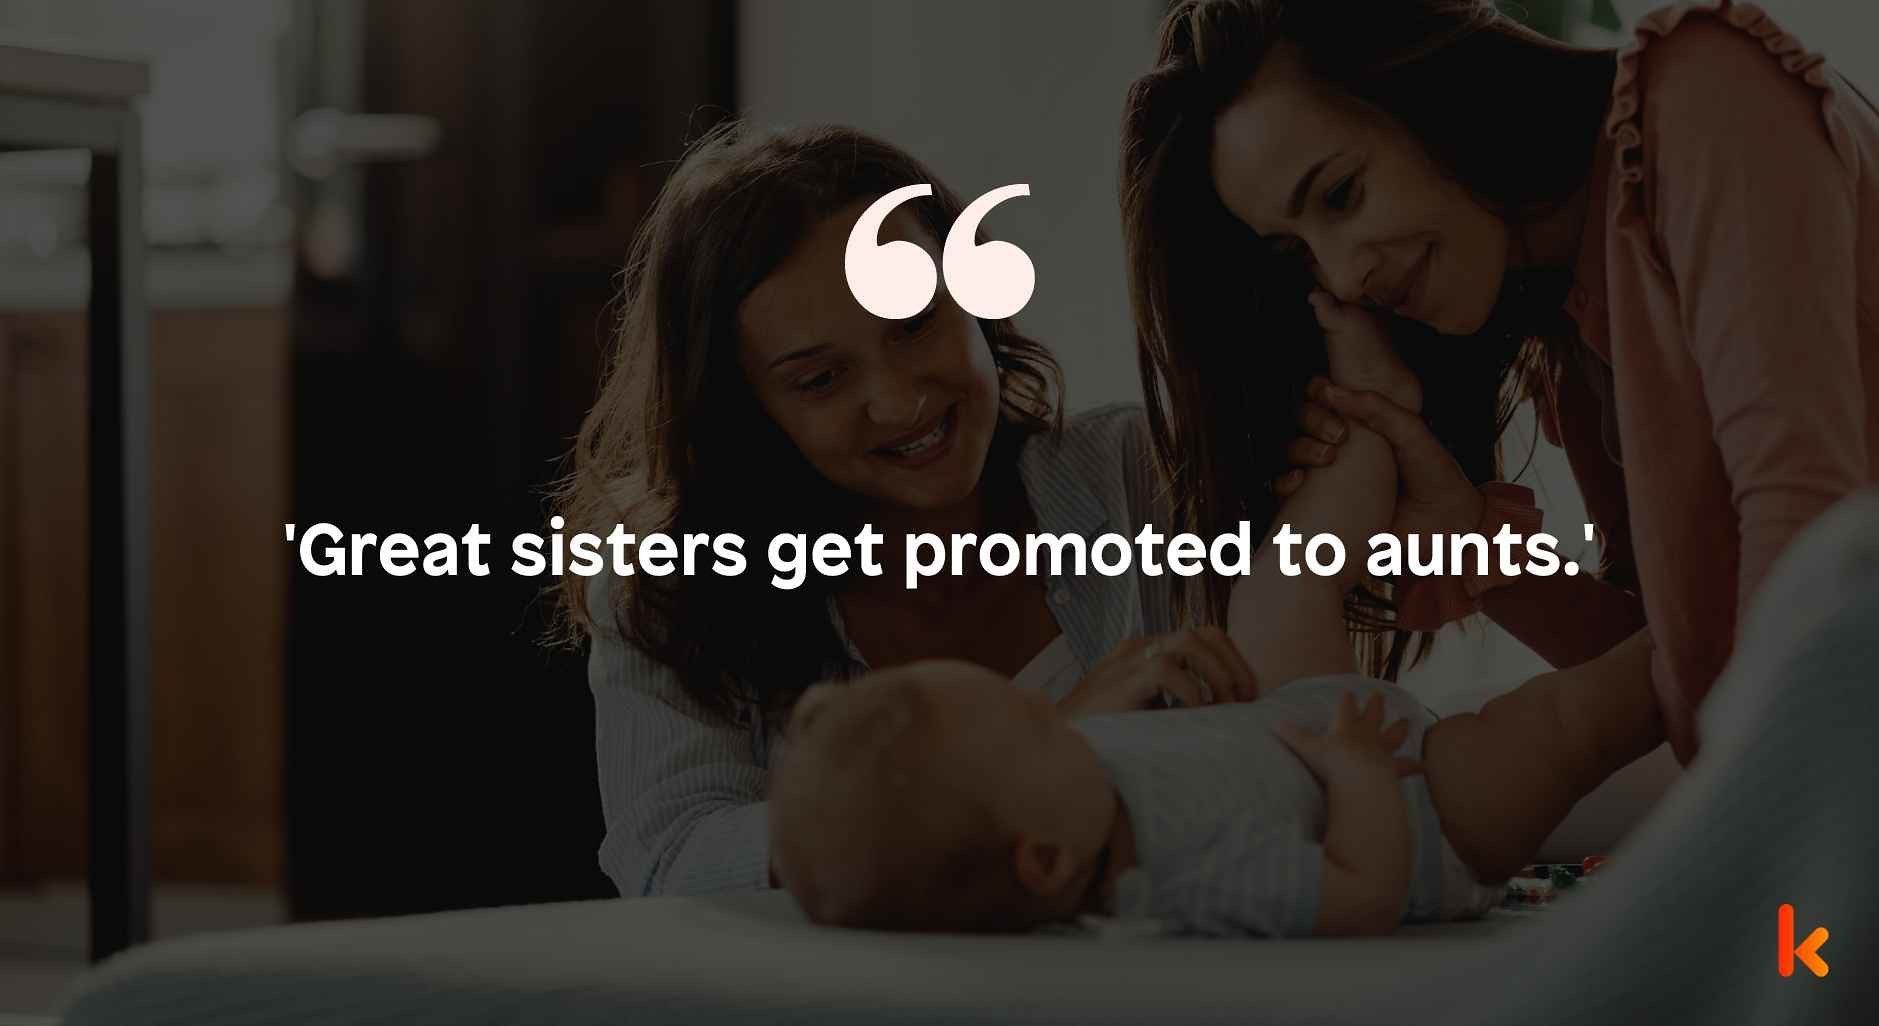 Funny Quote For Becoming An Aunt For The First Time